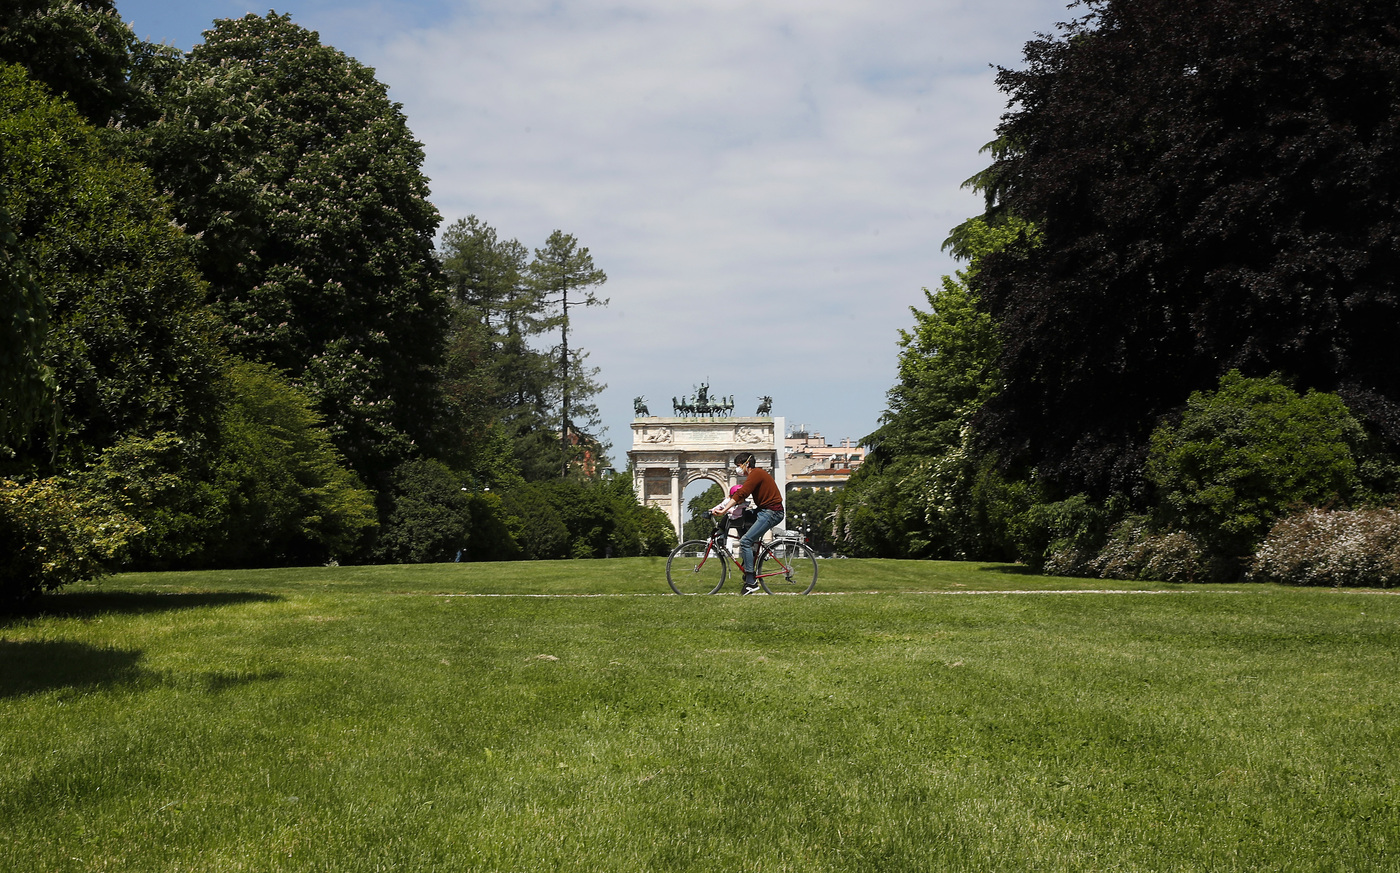 A man rides a bicycle in a park which reopened after several weeks of closure, in Milan, Italy, Monday, May 4, 2020. Italy began stirring again Monday after a two-month coronavirus shutdown, with 4.4 million Italians able to return to work and restrictions on movement eased in the first European country to lock down in a bid to stem COVID-19 infections. (AP Photo/Antonio Calanni)